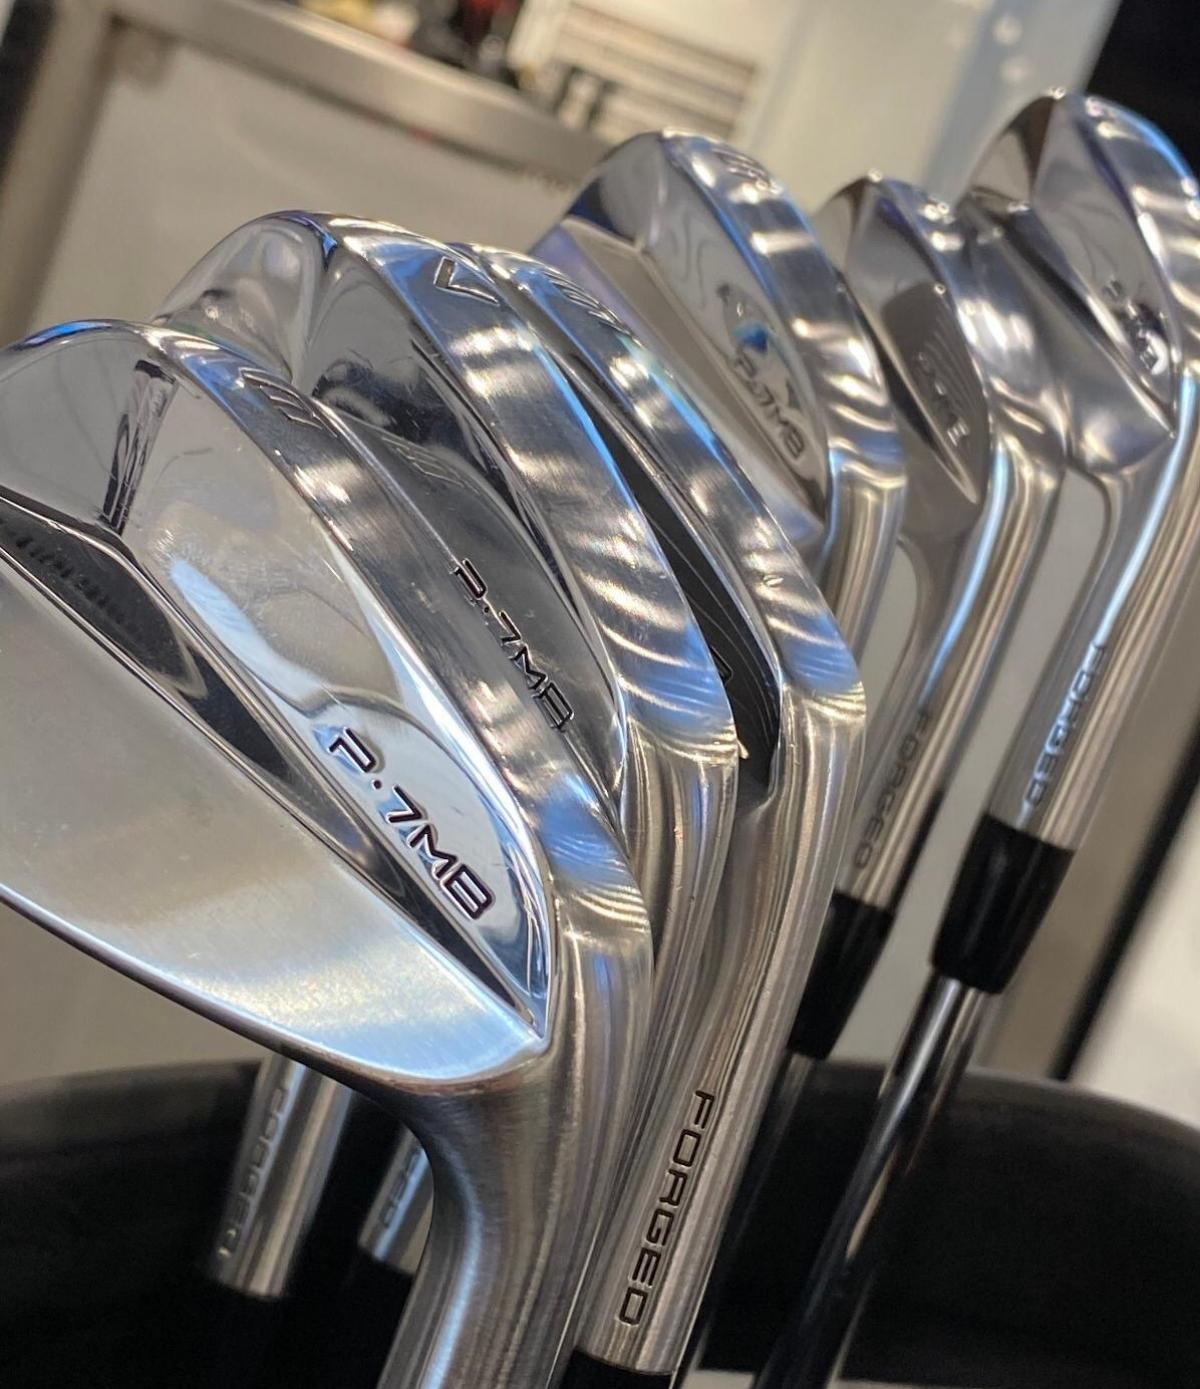 TaylorMade reveals Rory McIlroy&#039;s new irons at Memorial Tournament